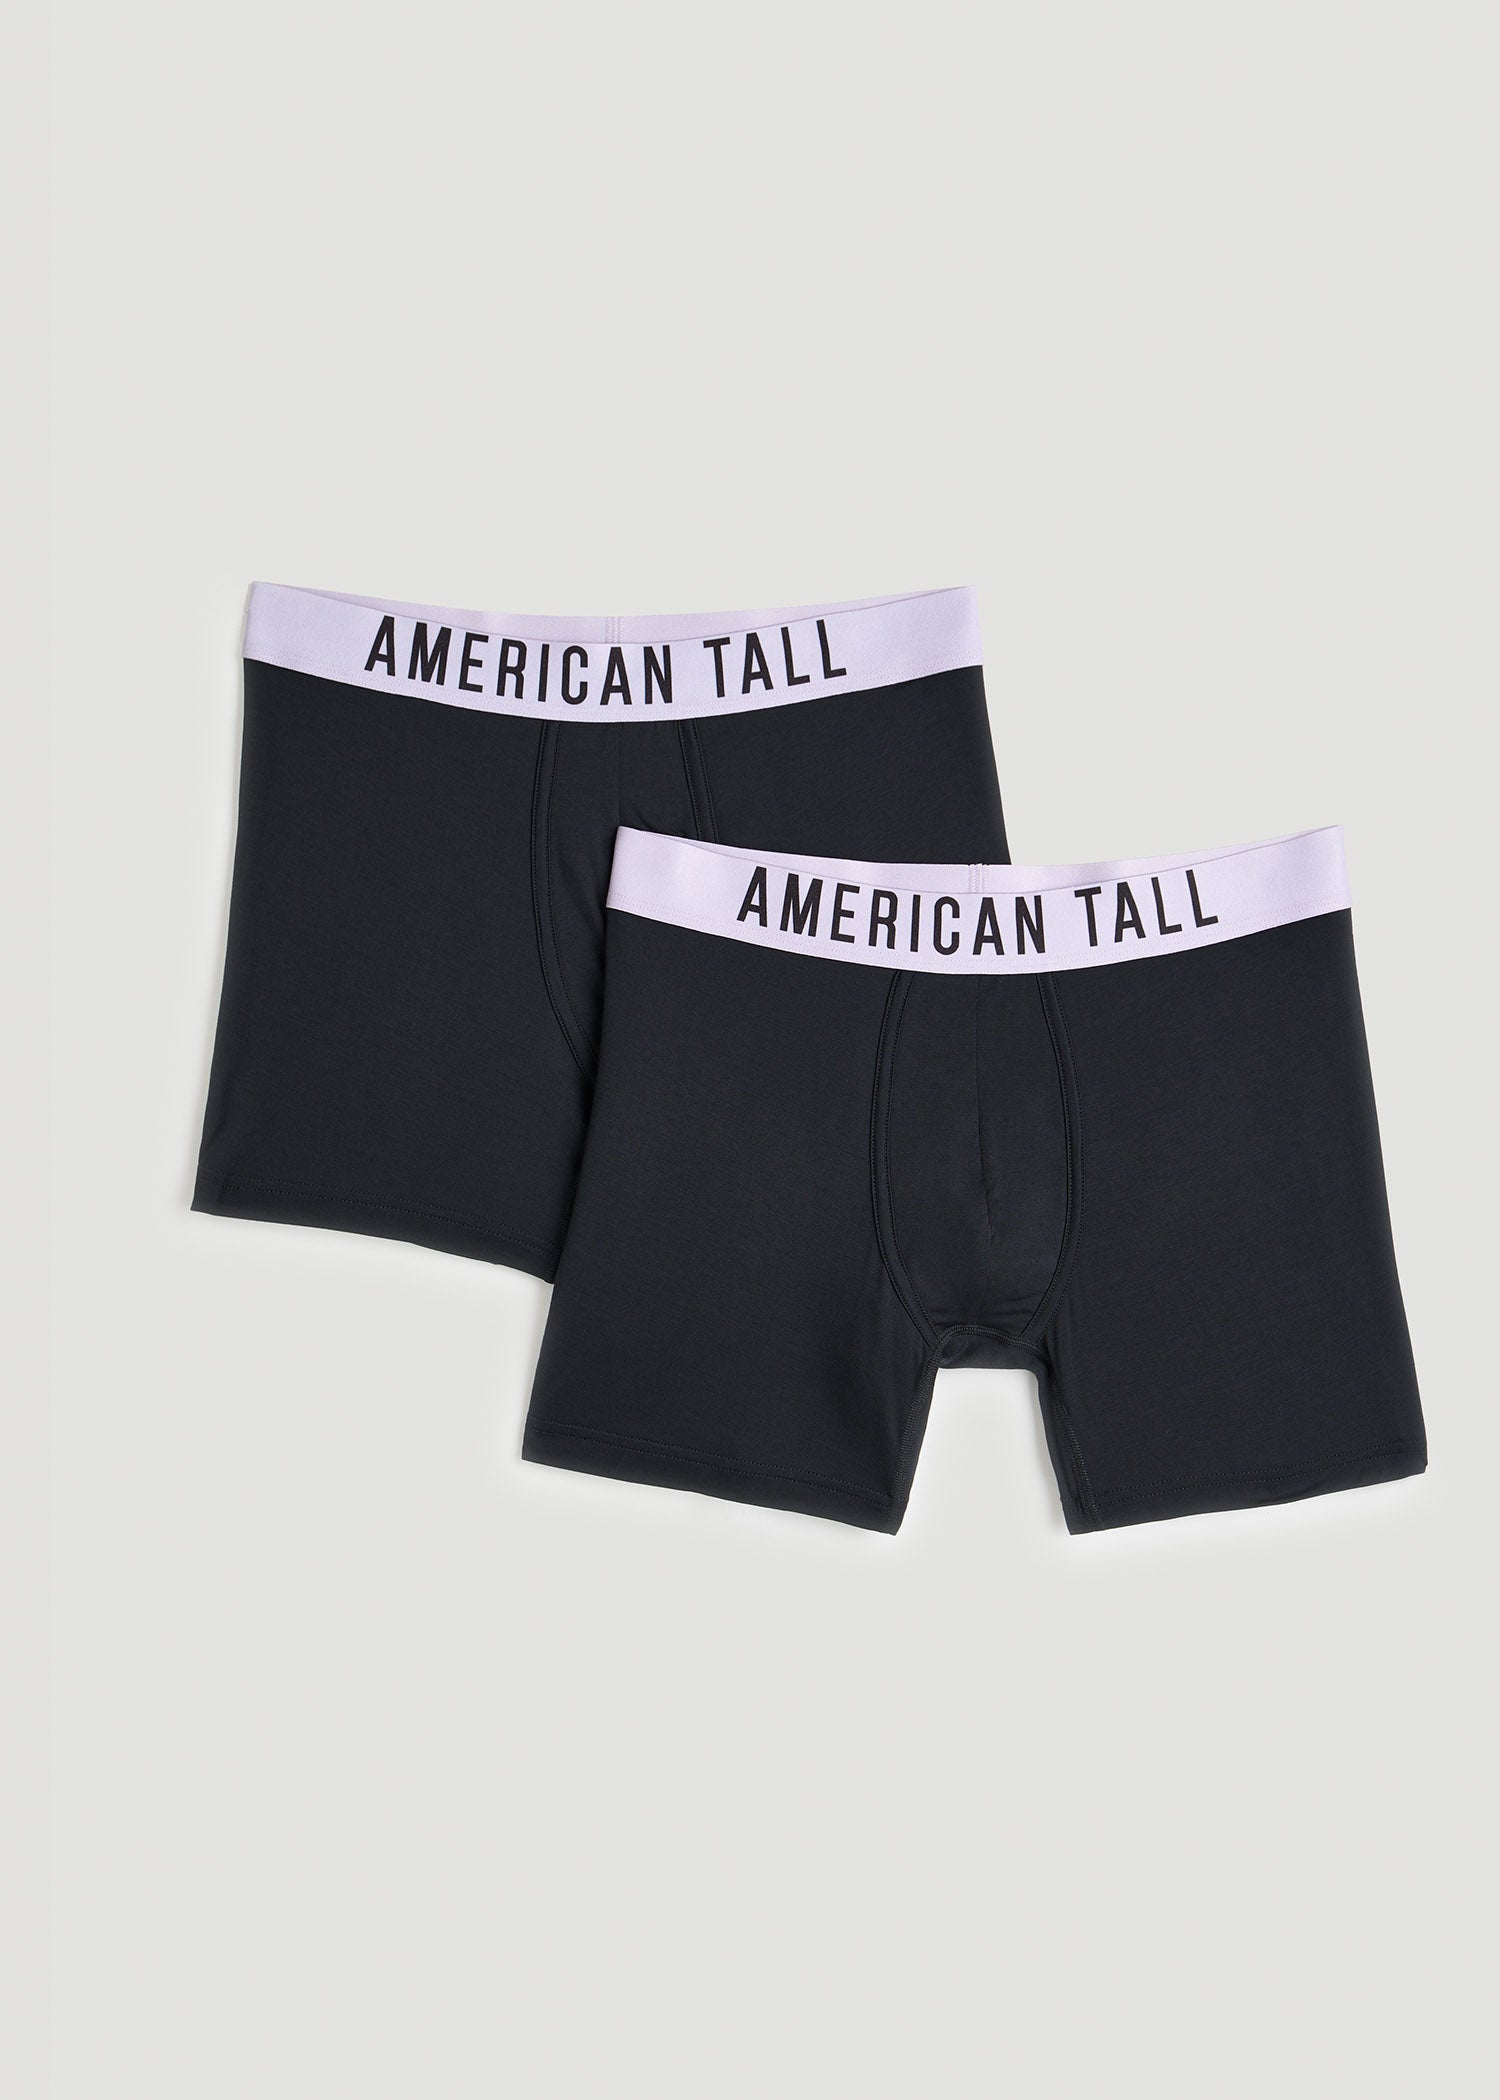    American-Tall-Mens-Tall-Original-Boxer-Briefs-in-Black-2-Pack-Black-front